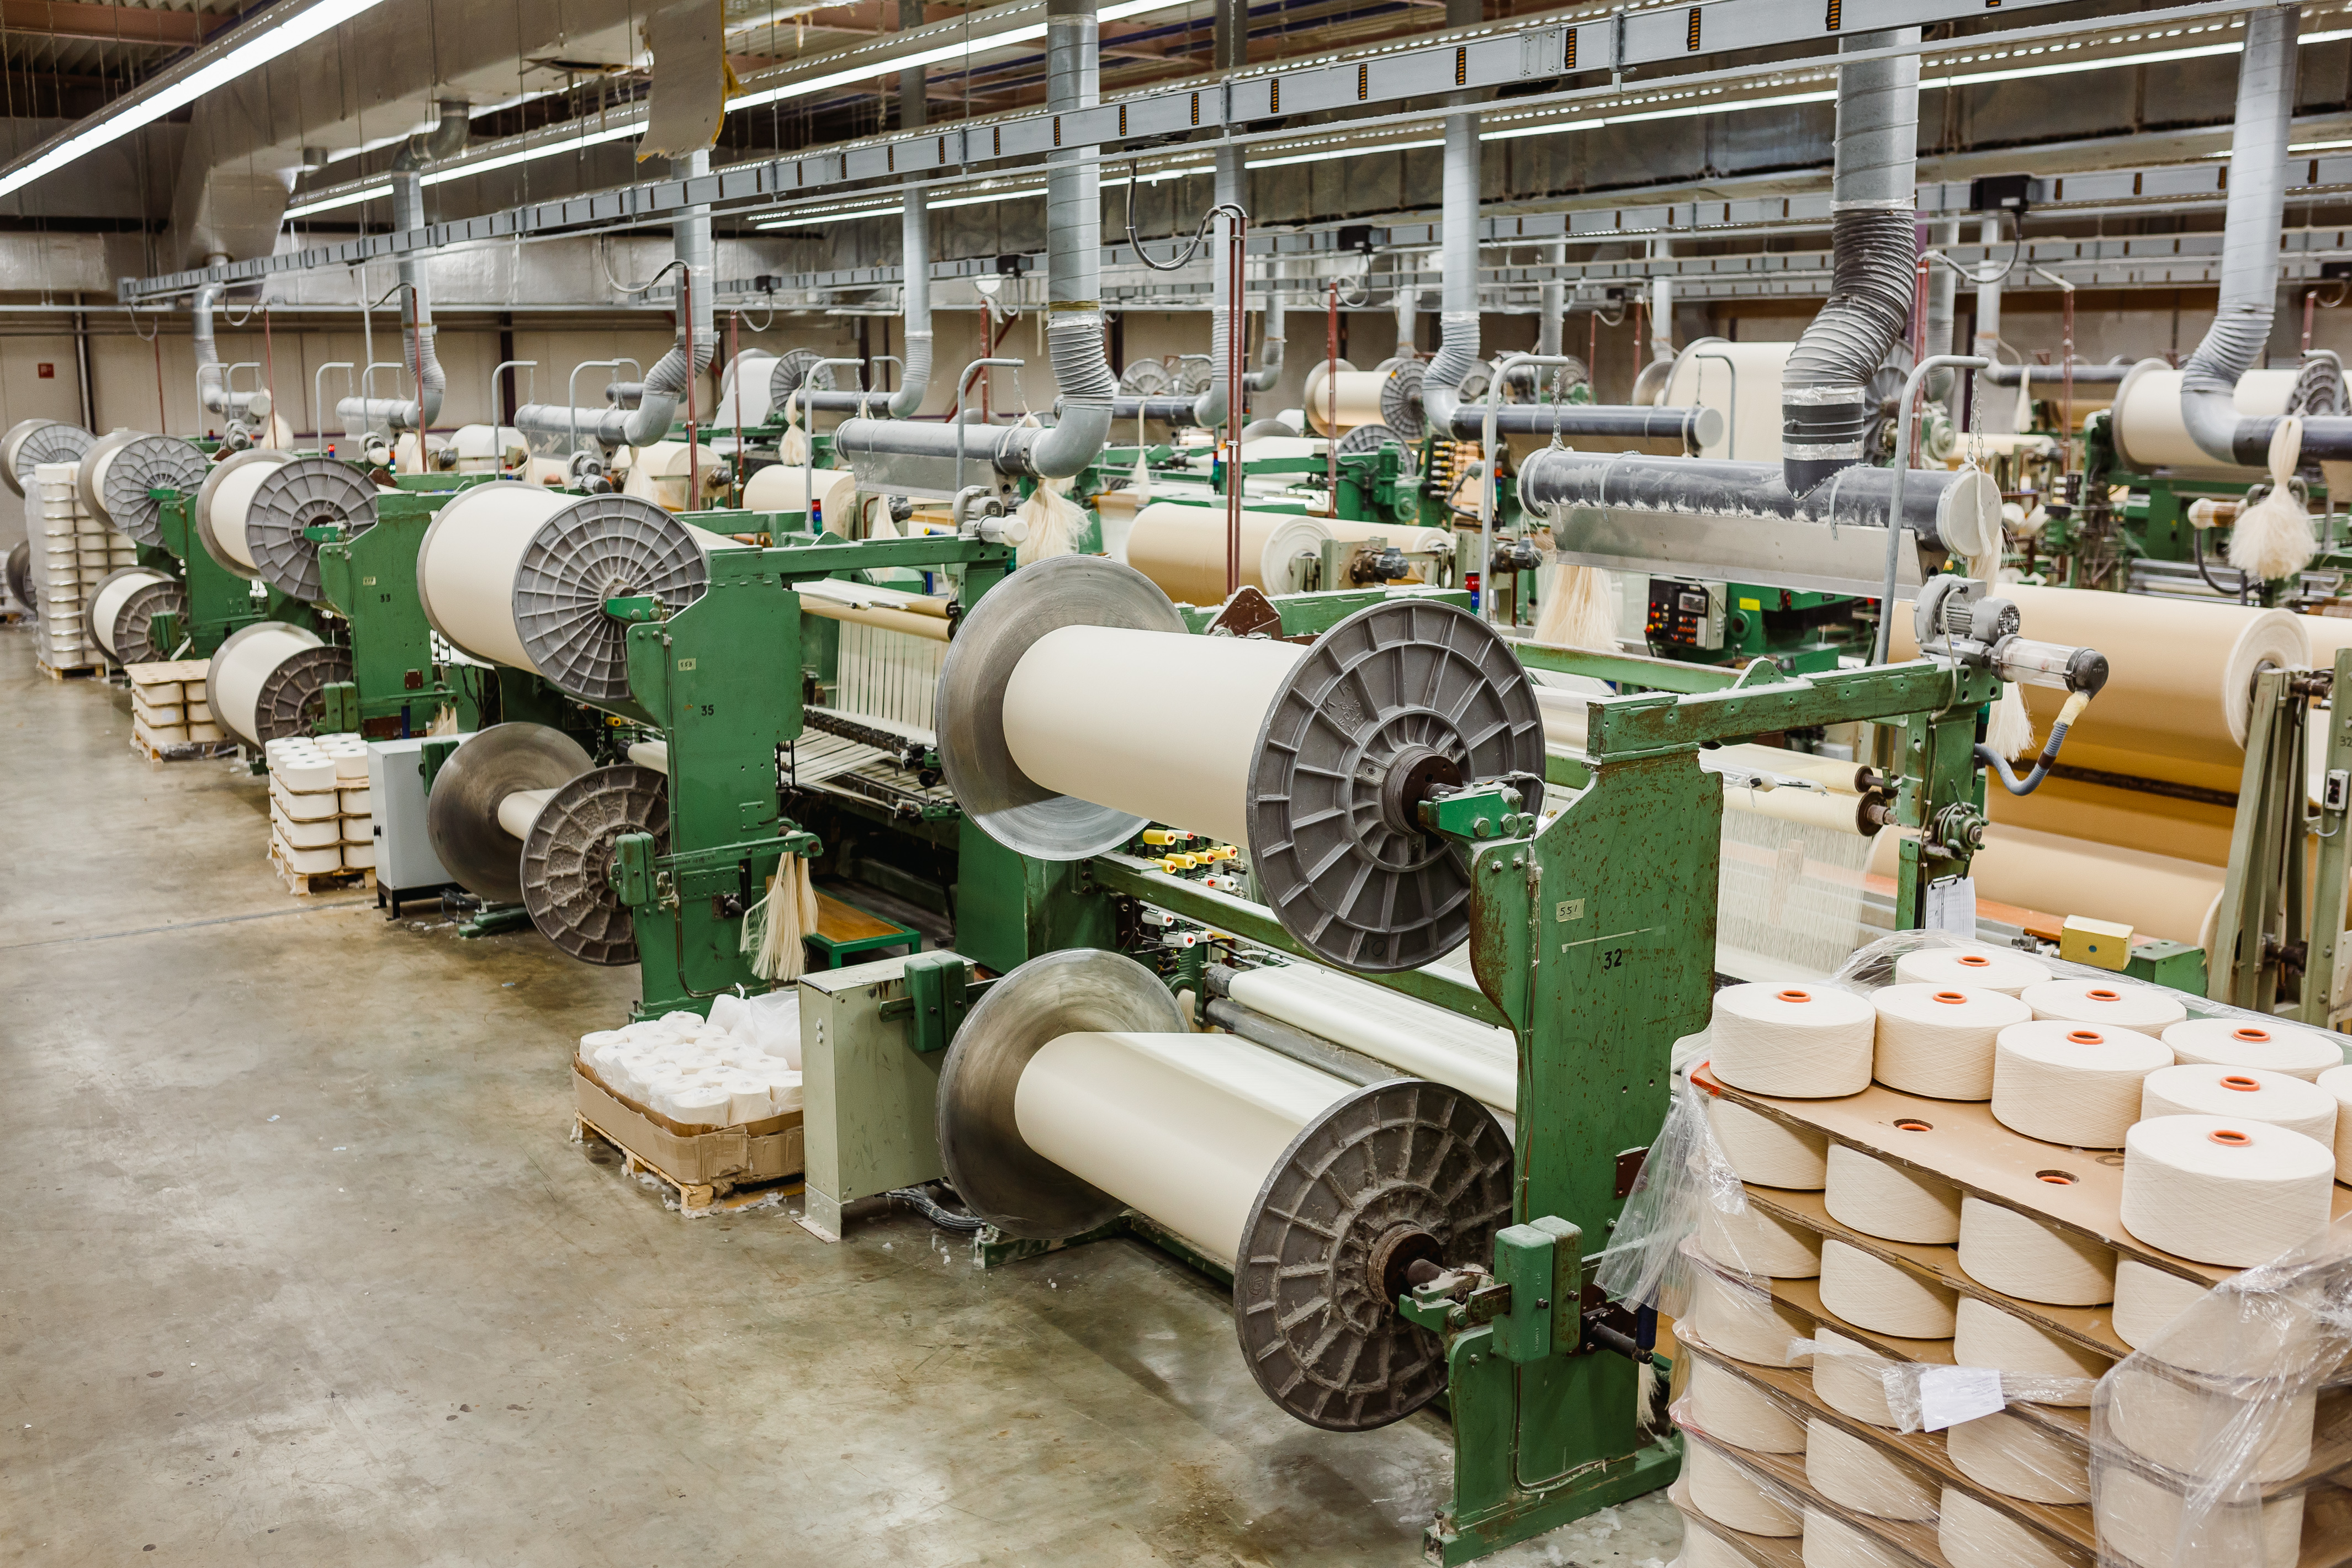 Raymakers weaving mill